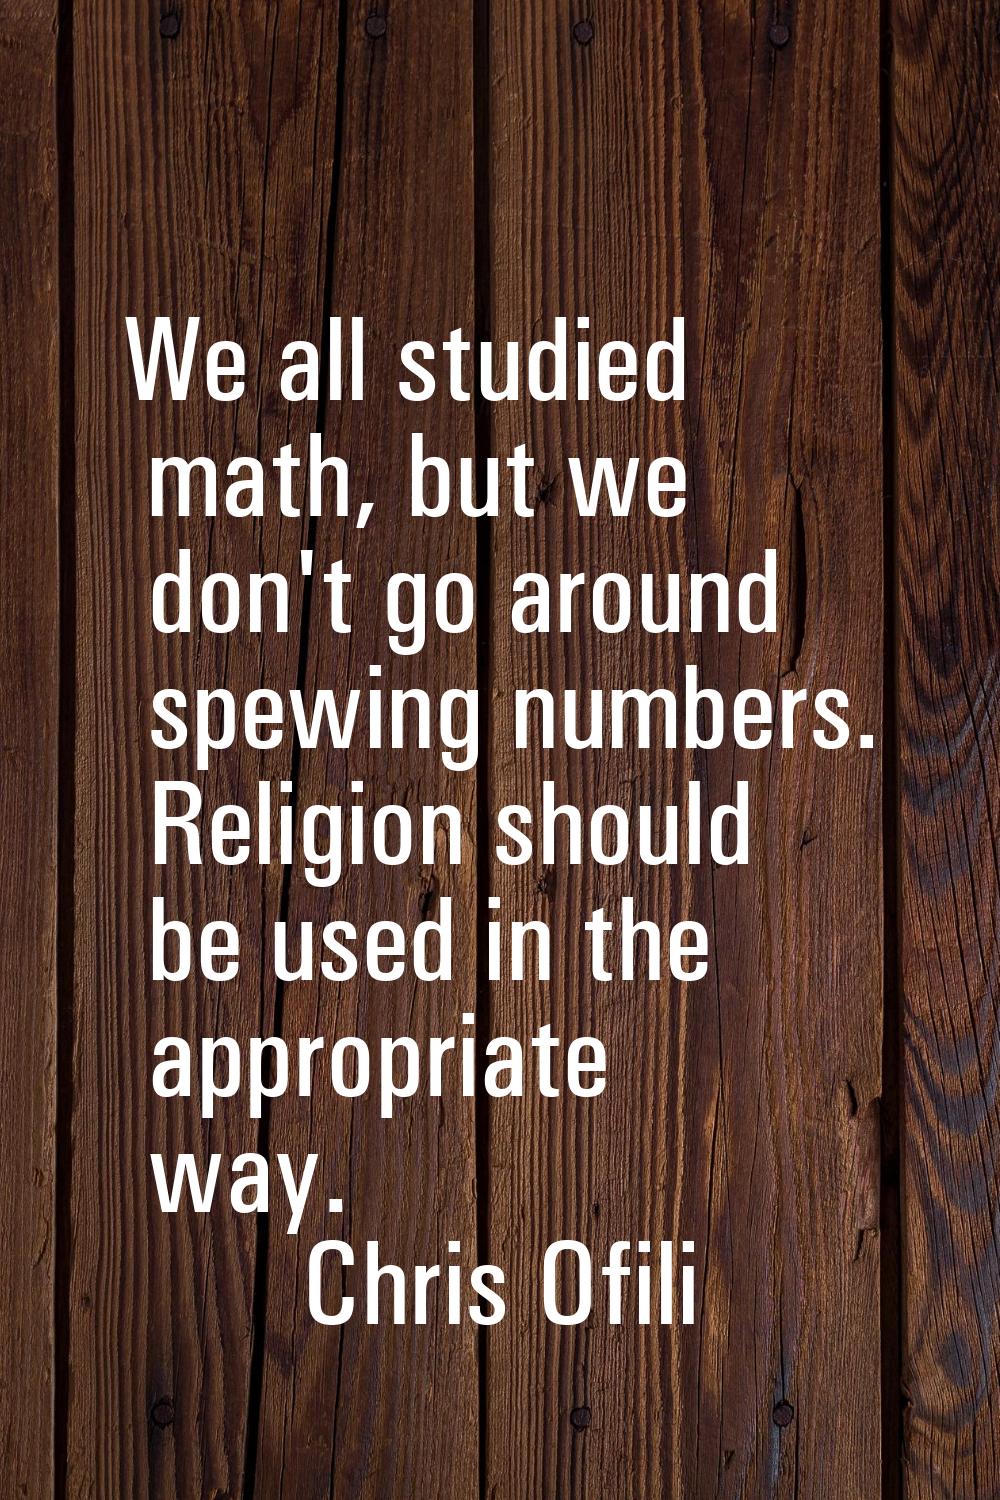 We all studied math, but we don't go around spewing numbers. Religion should be used in the appropr